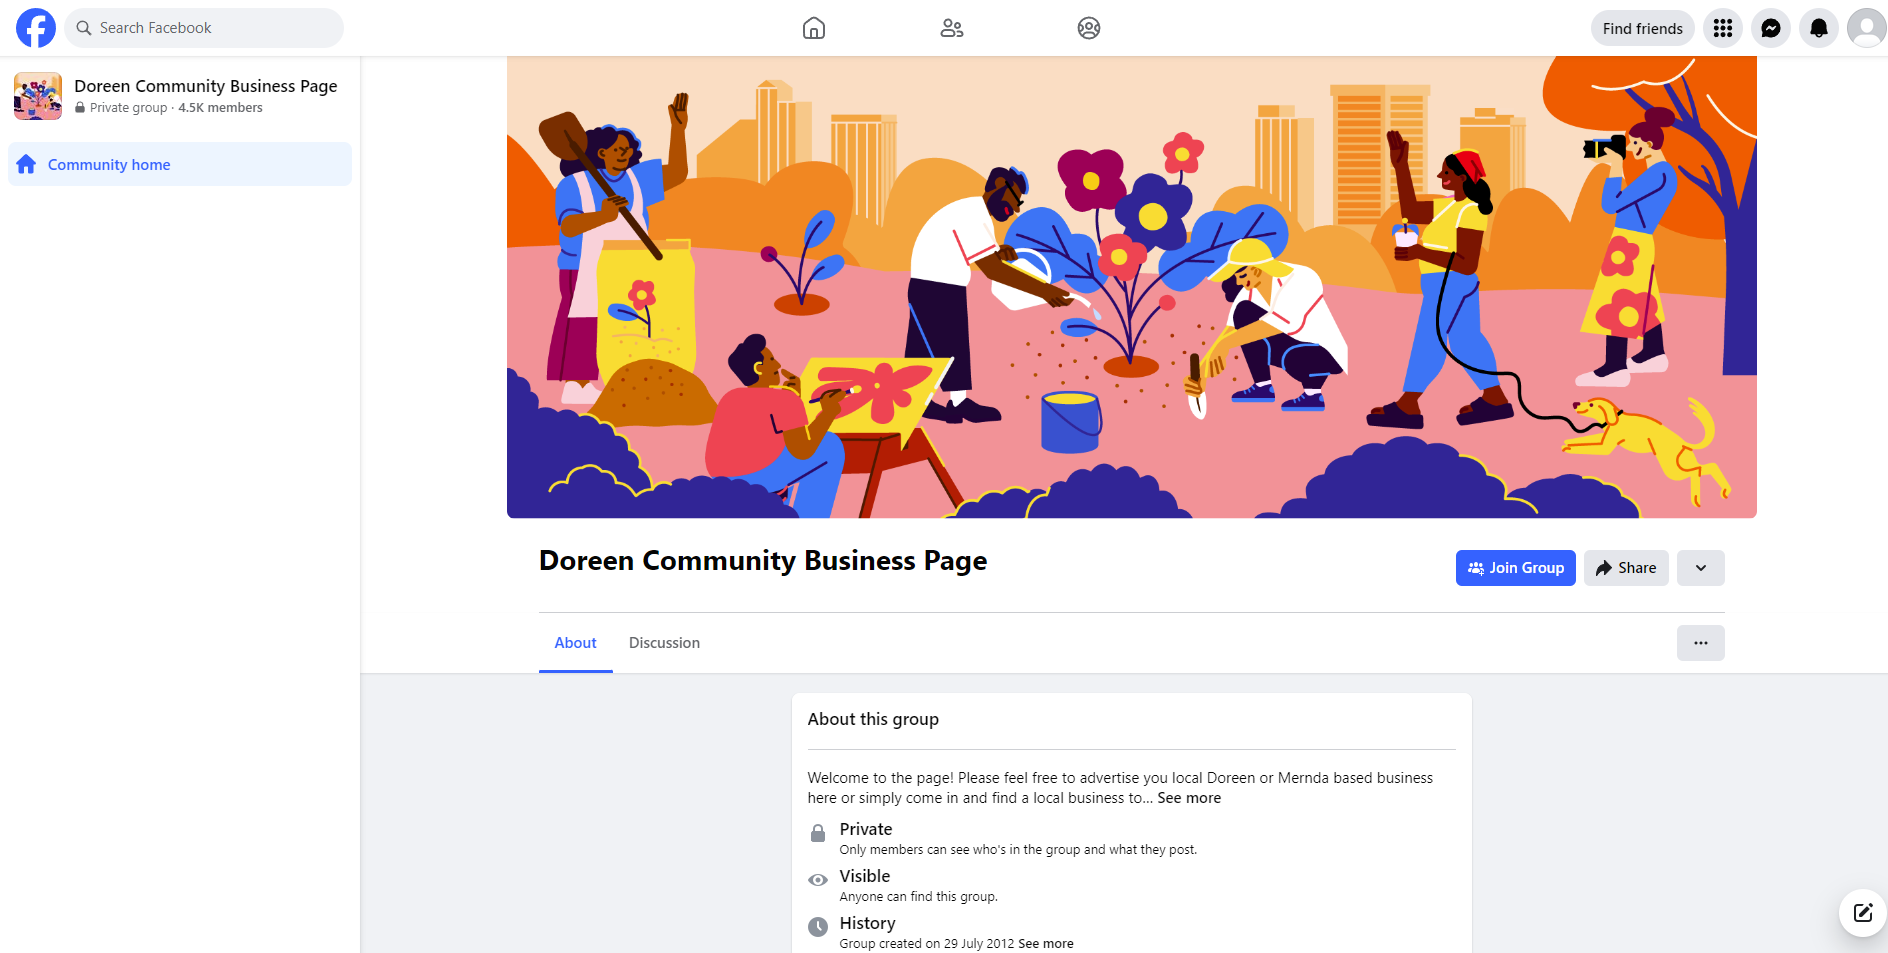 Doreen Community Business Page